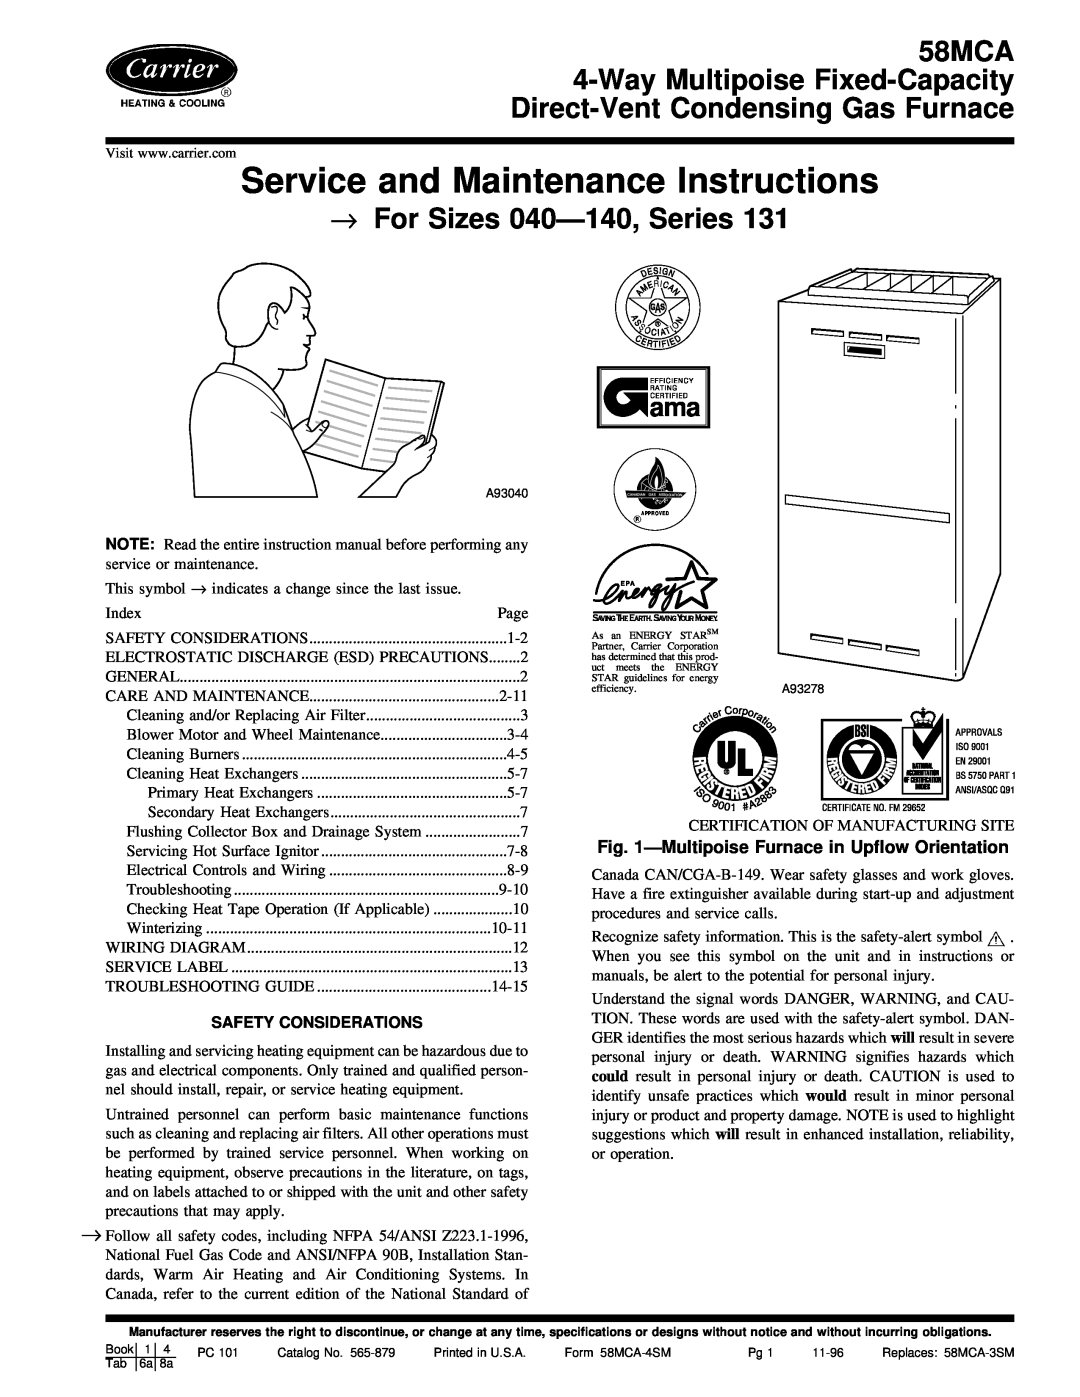 Carrier 58MCA instruction manual Service and Maintenance Instructions, →For Sizes 040Ð140, Series, Safety Considerations 